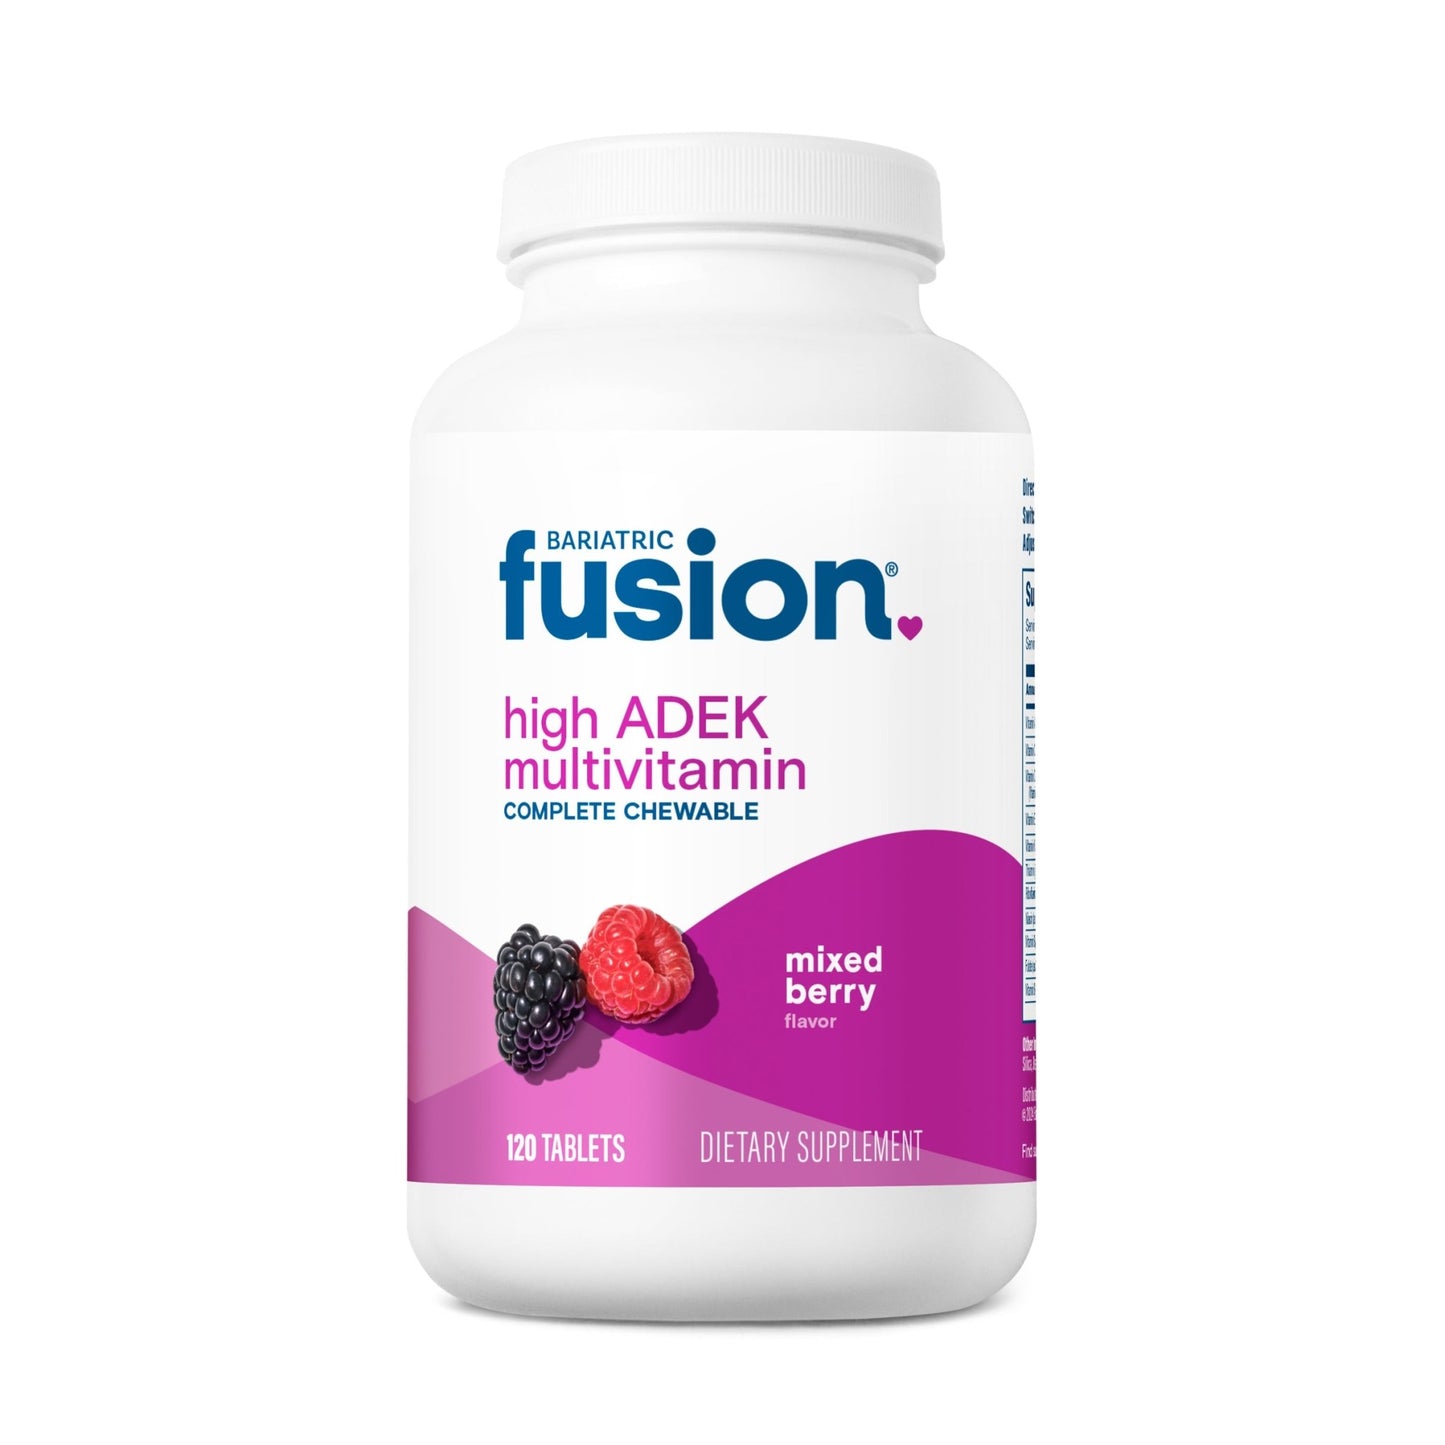 Bariatric Fusion Mixed Berry Complete Chewable Bariatric Multivitamin ADEK